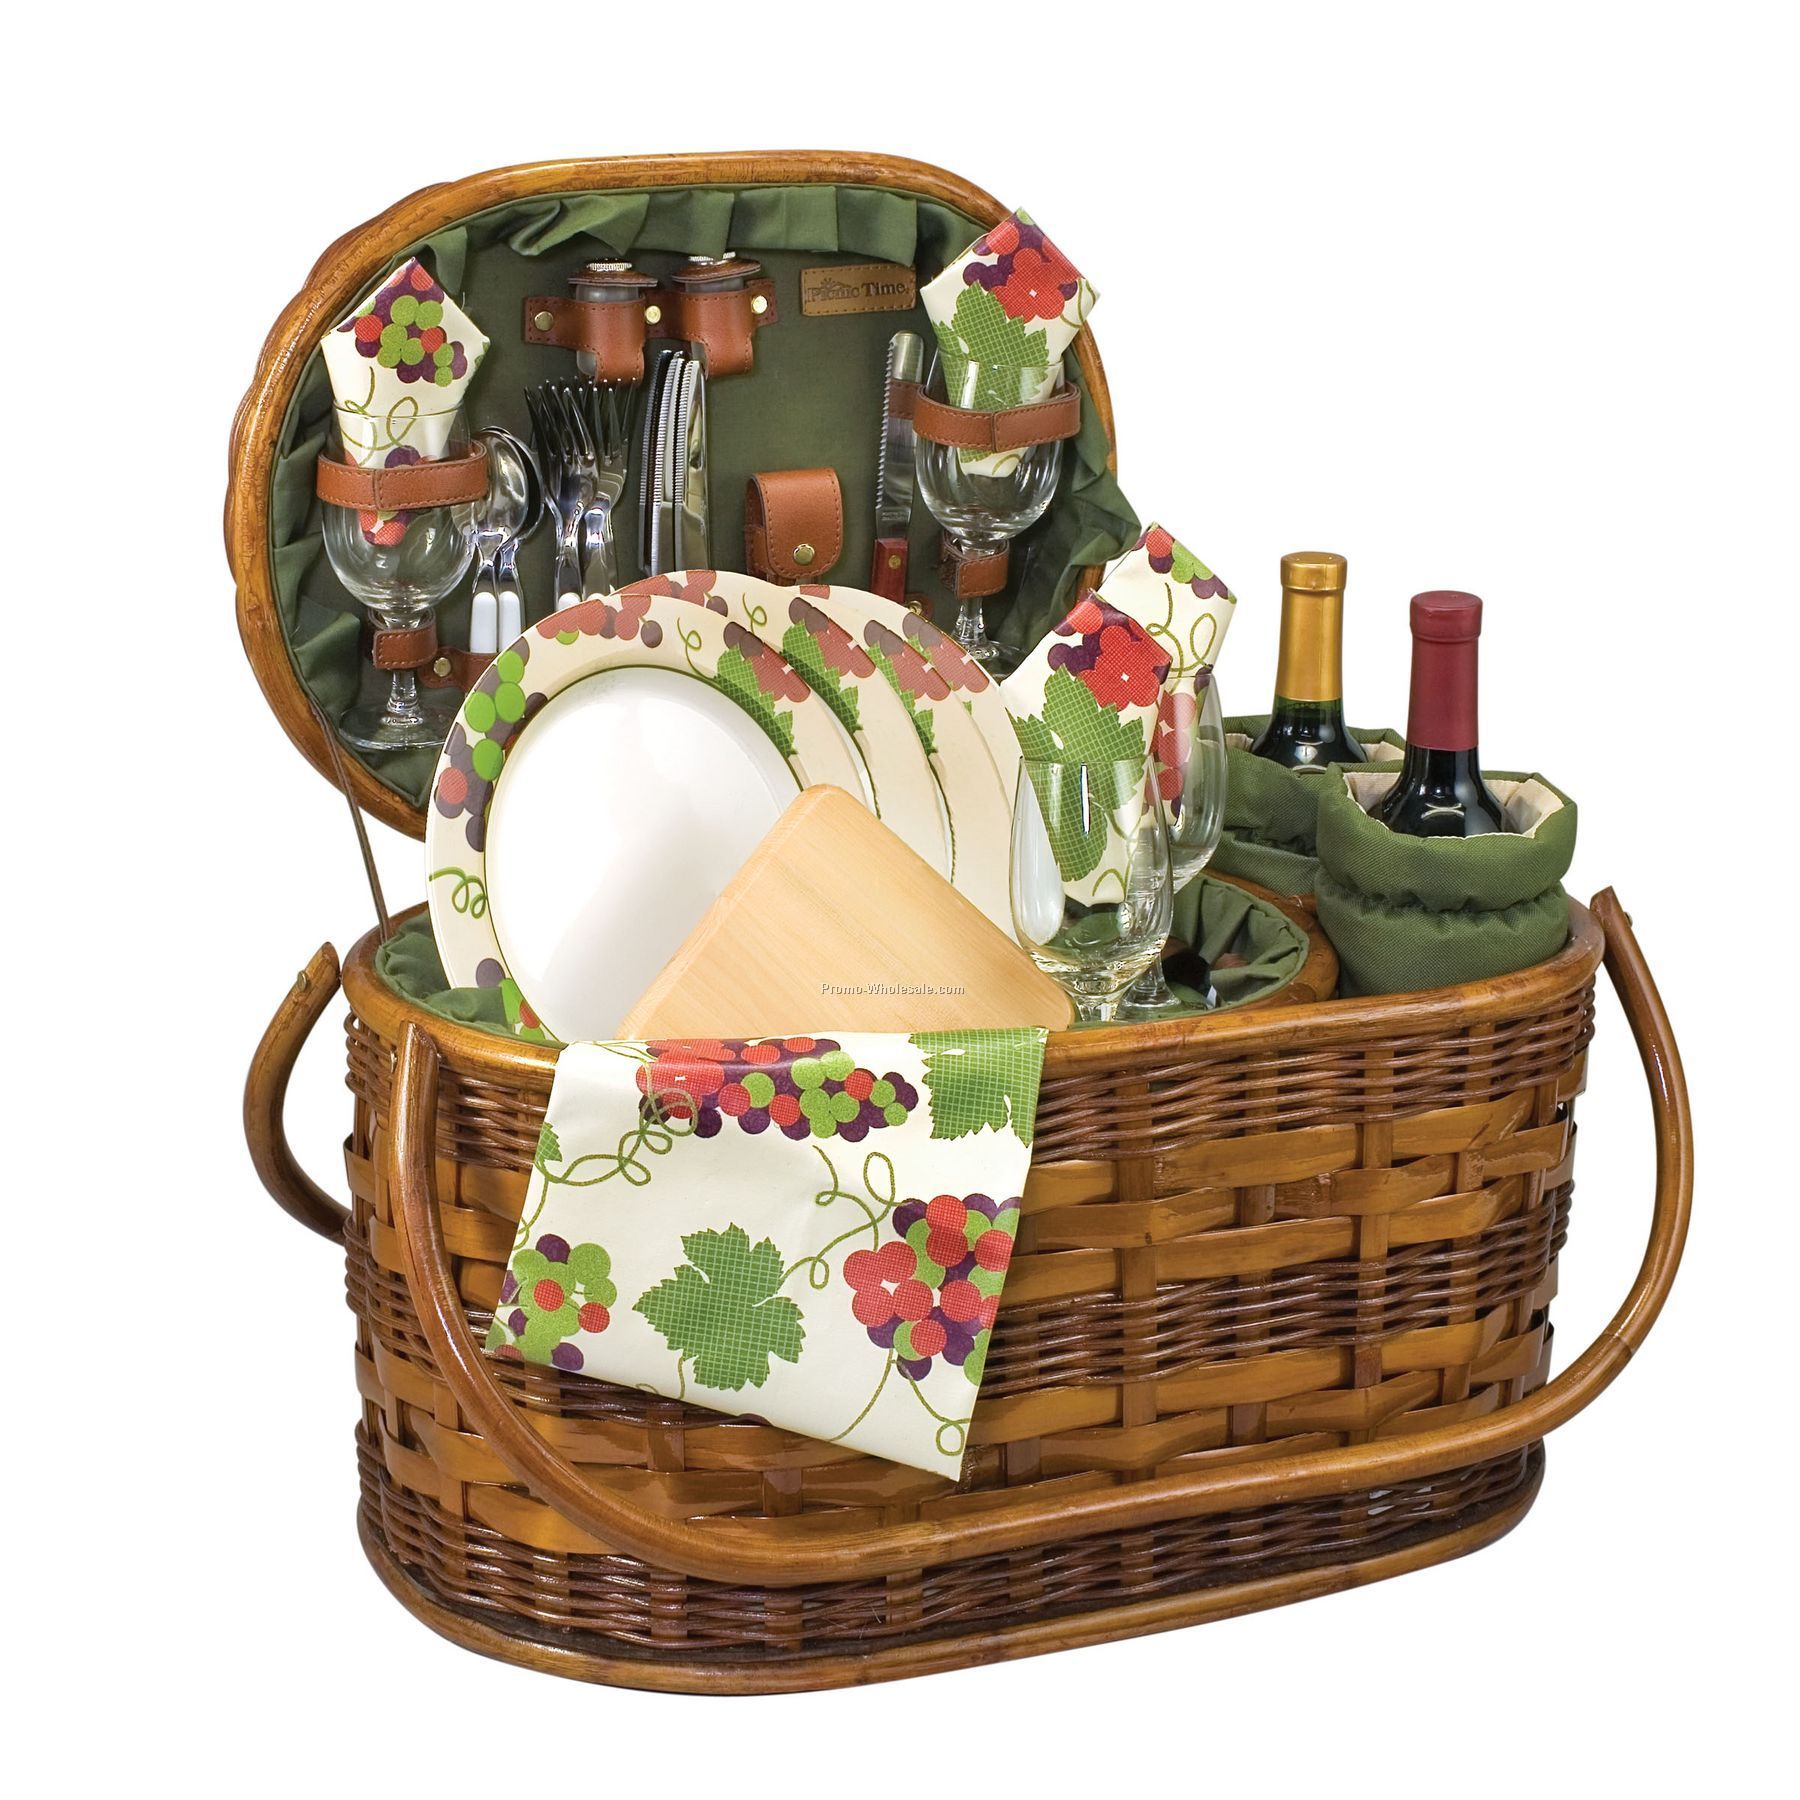 Merlot Deluxe Oval Picnic Basket With Service For 4